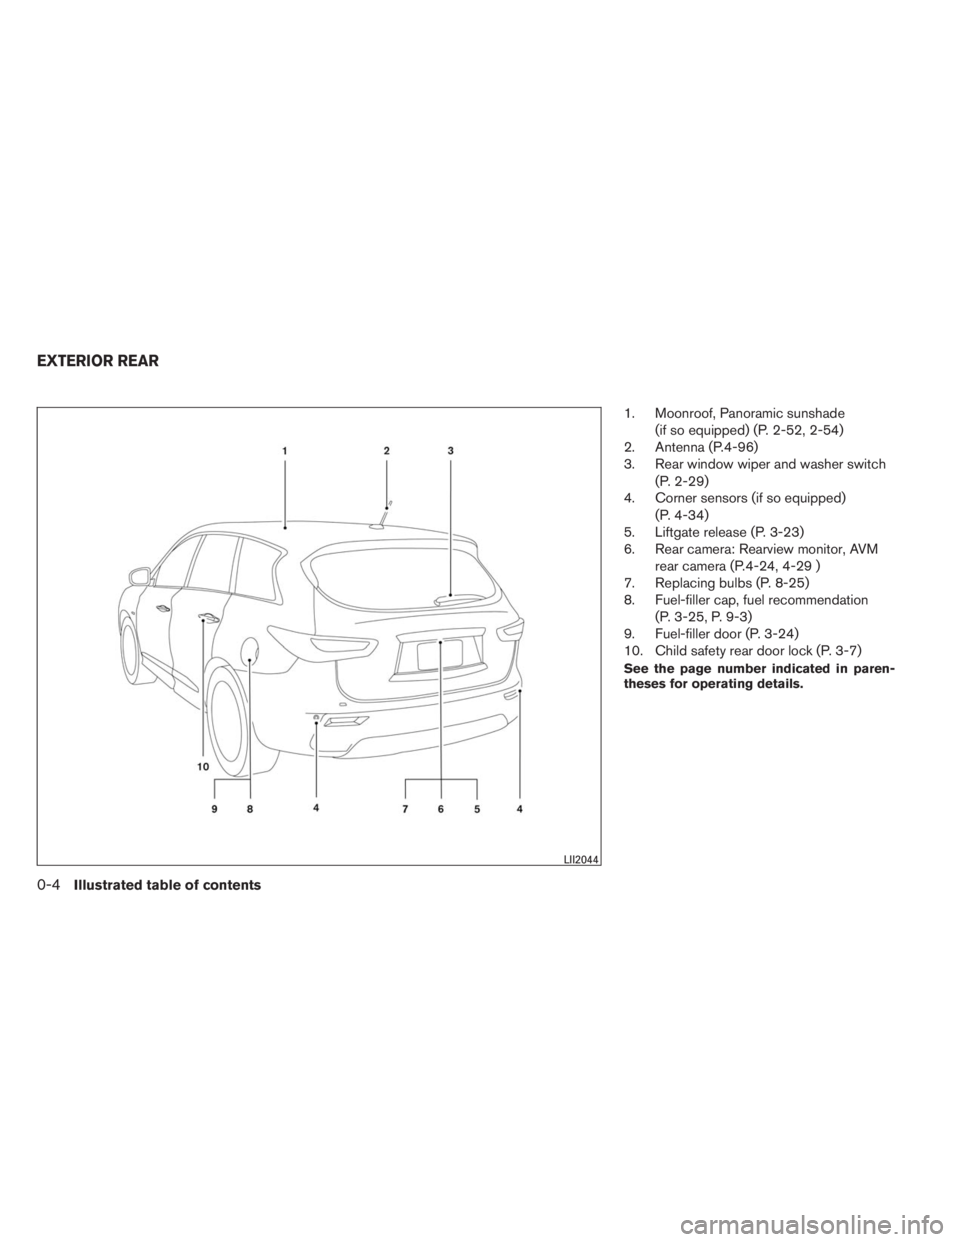 INFINITI QX60 2014  Owners Manual 1. Moonroof, Panoramic sunshade
(if so equipped) (P. 2-52, 2-54)
2. Antenna (P.4-96)
3. Rear window wiper and washer switch
(P. 2-29)
4. Corner sensors (if so equipped)
(P. 4-34)
5. Liftgate release (